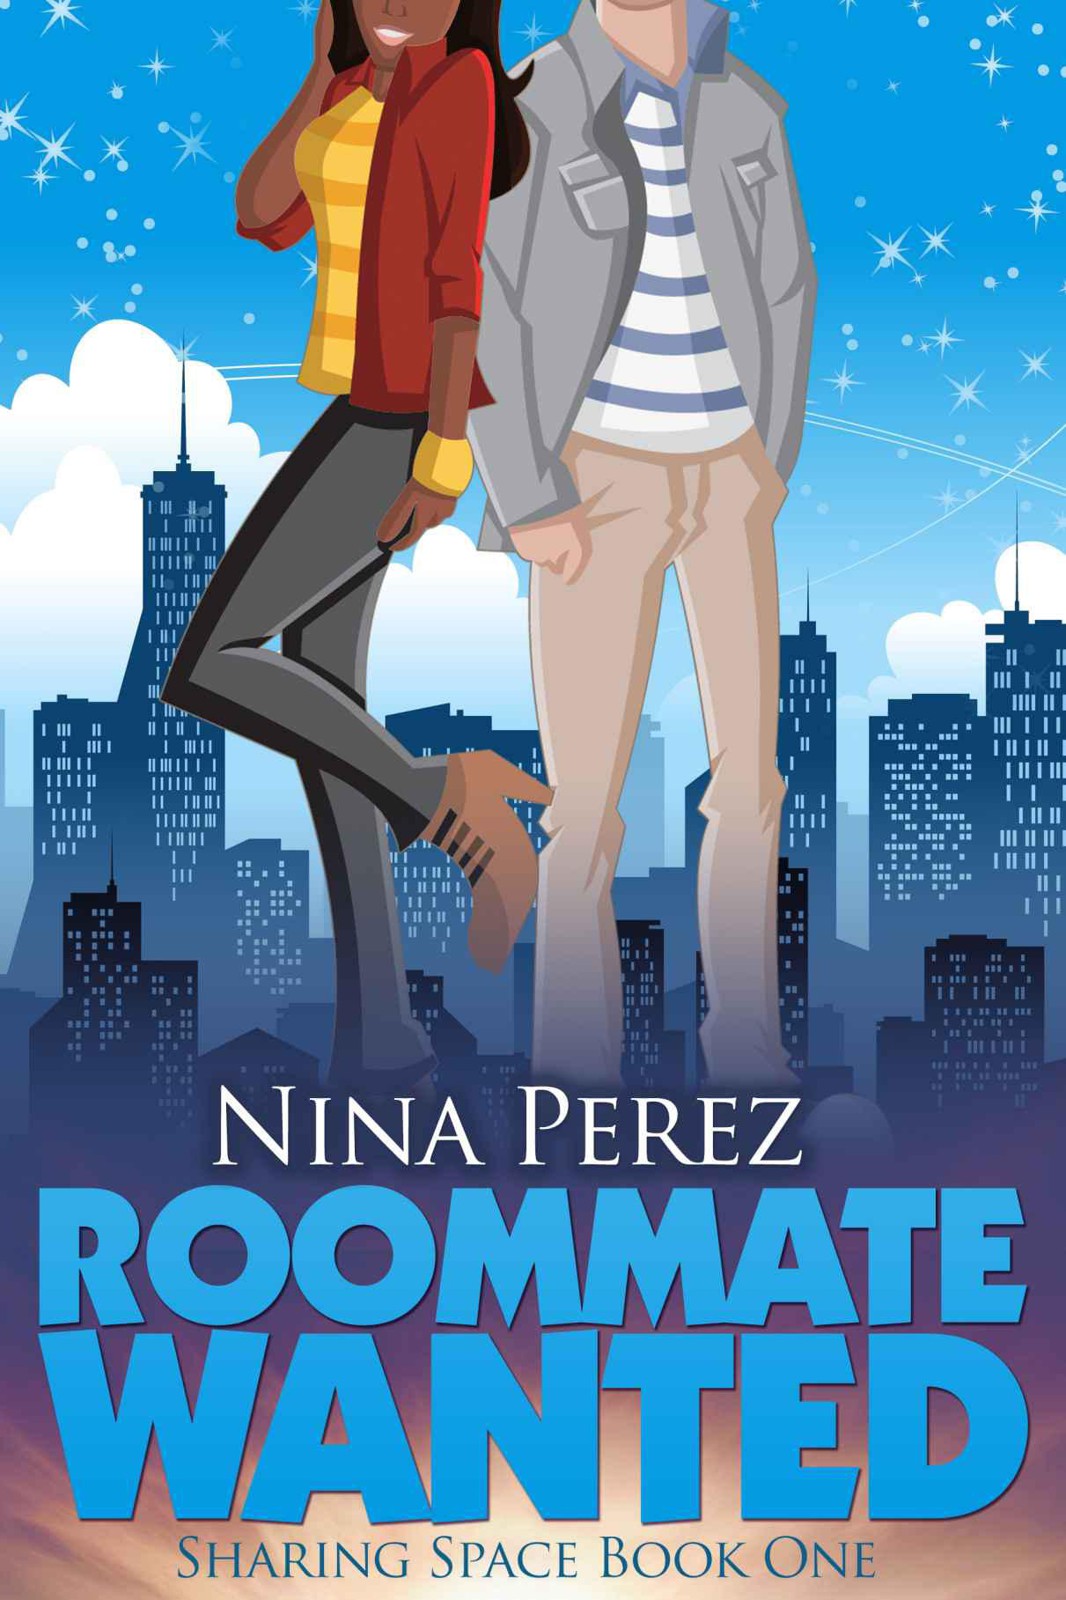 Roommate Wanted (Sharing Space #1) by Nina Perez